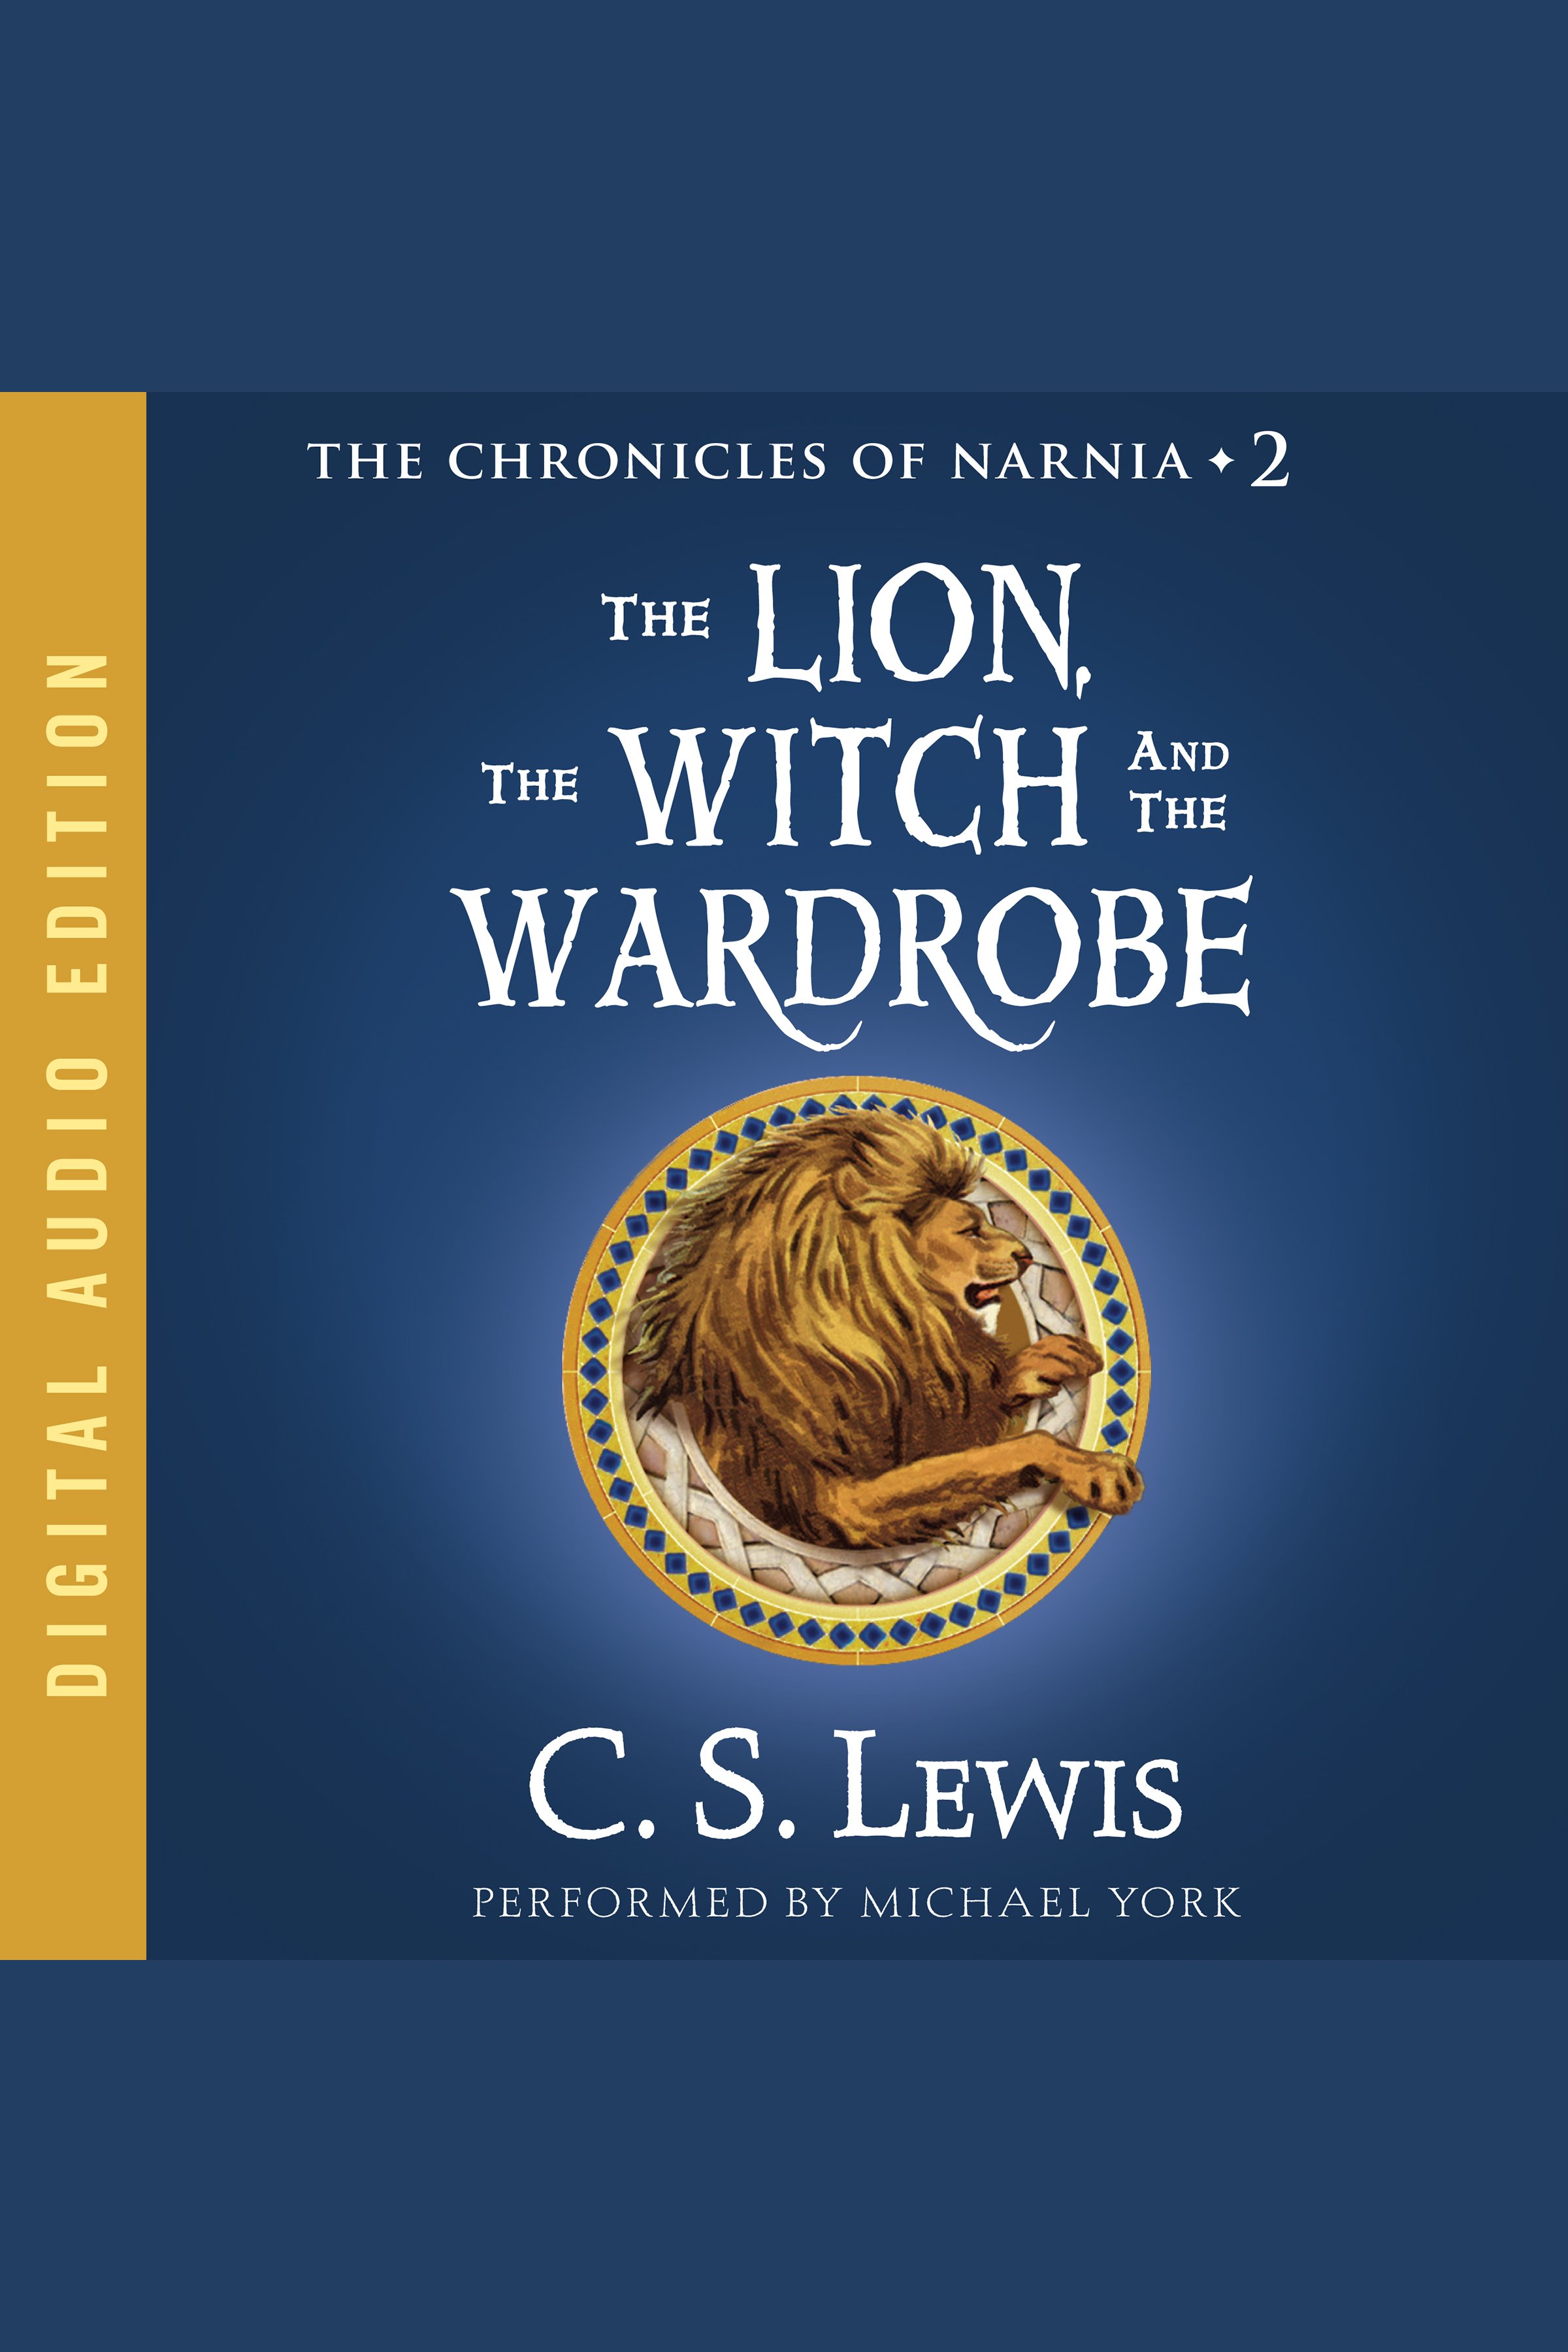 The lion, the witch and the wardrobe cover image